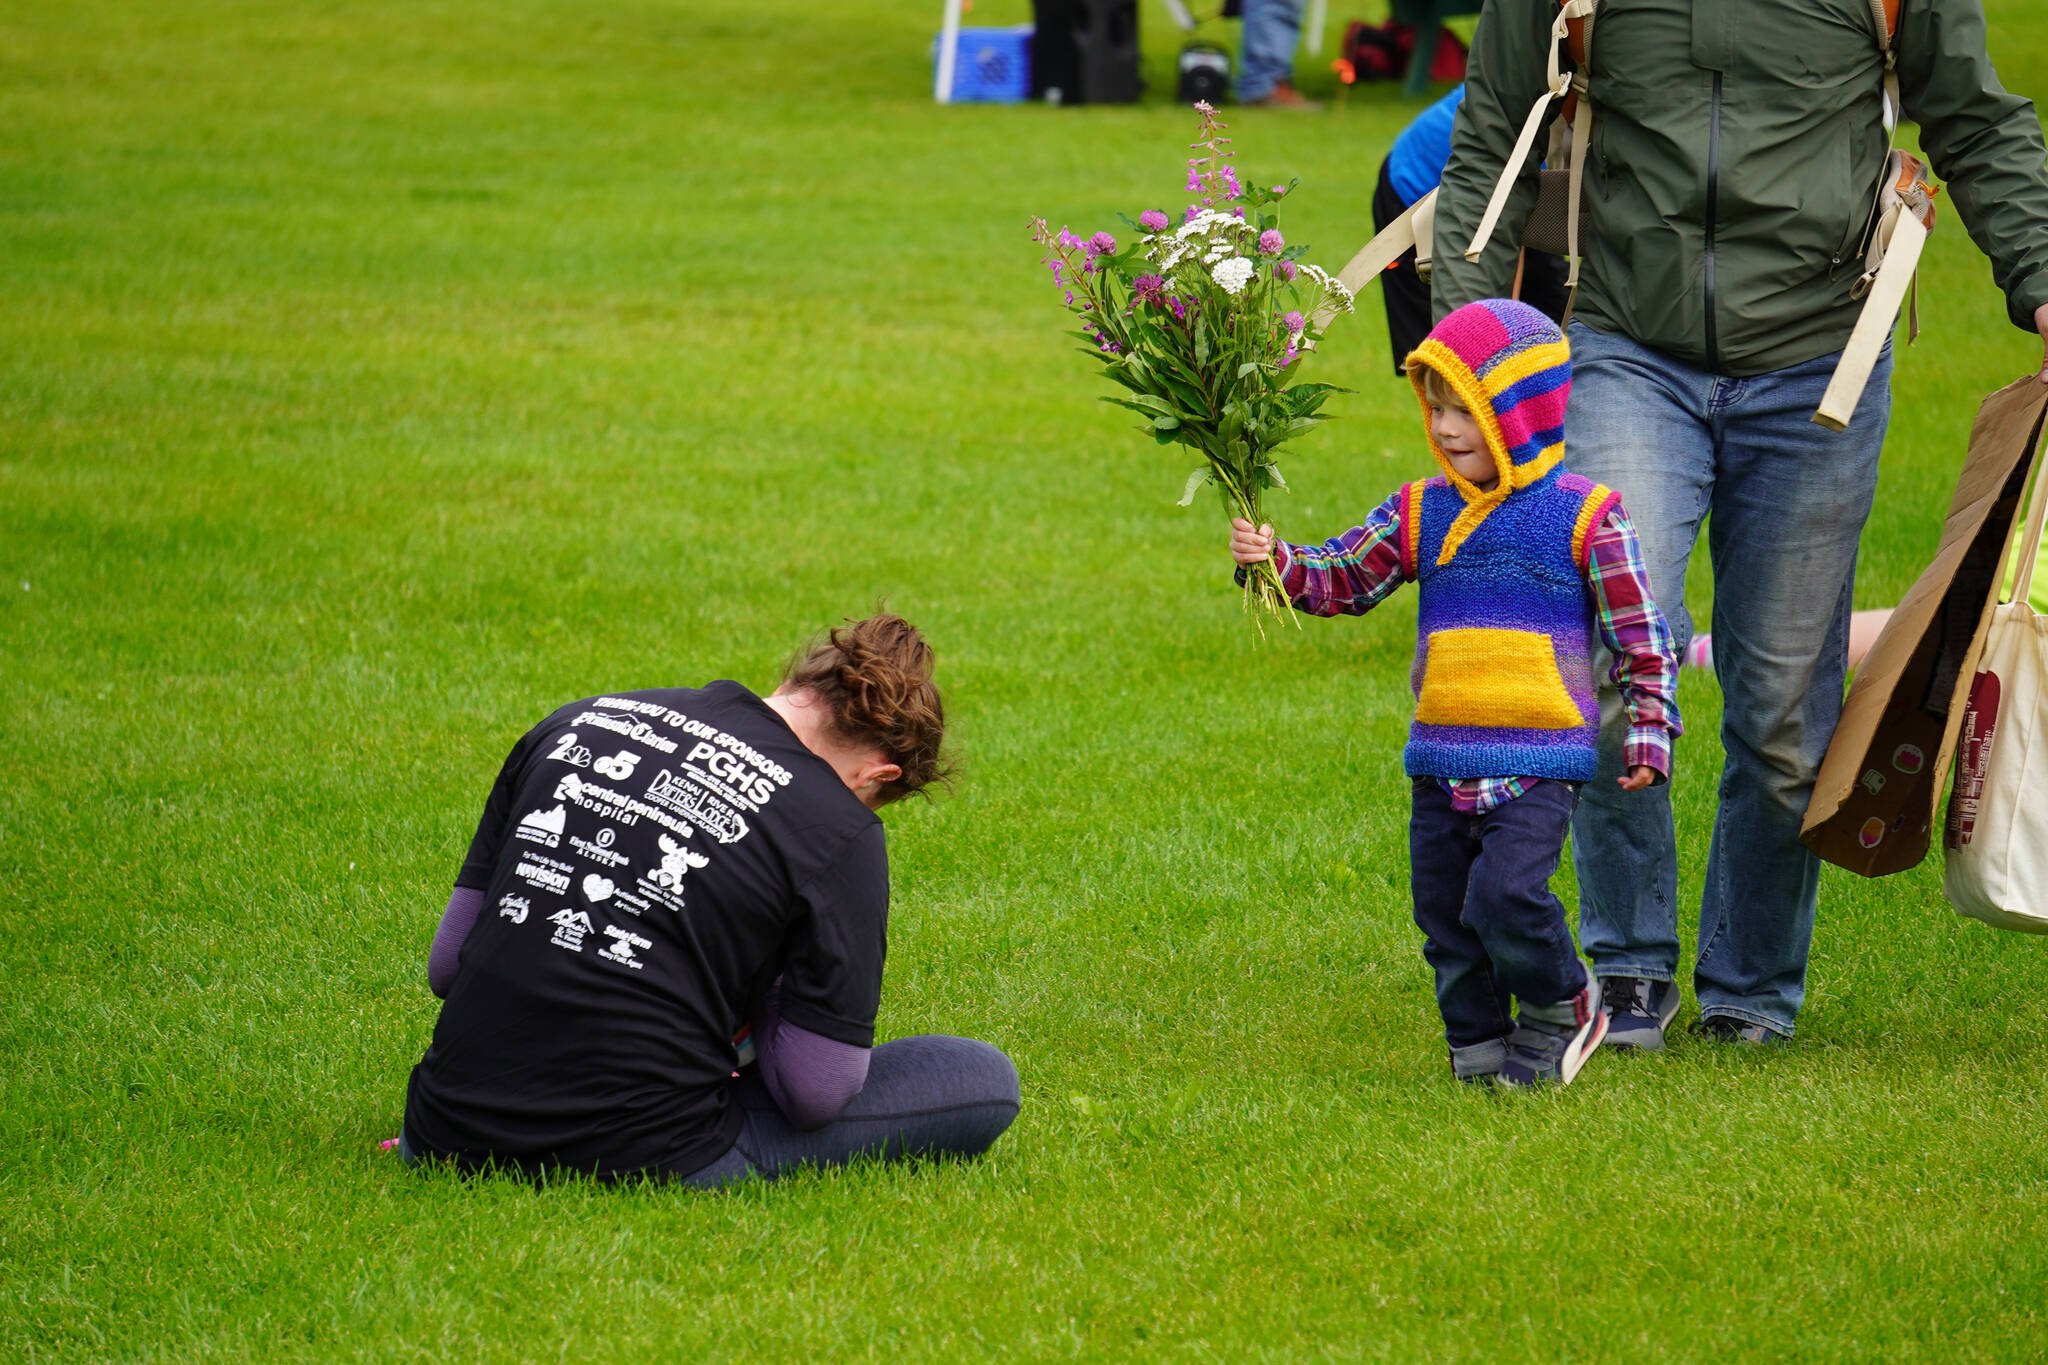 Mollie Messick receives flowers from her child after finishing the 34th Annual Kenai Peninsula Violence Free Community Run in Kenai, Alaska, on Saturday, Aug. 12, 2023. (Jake Dye/Peninsula Clarion)